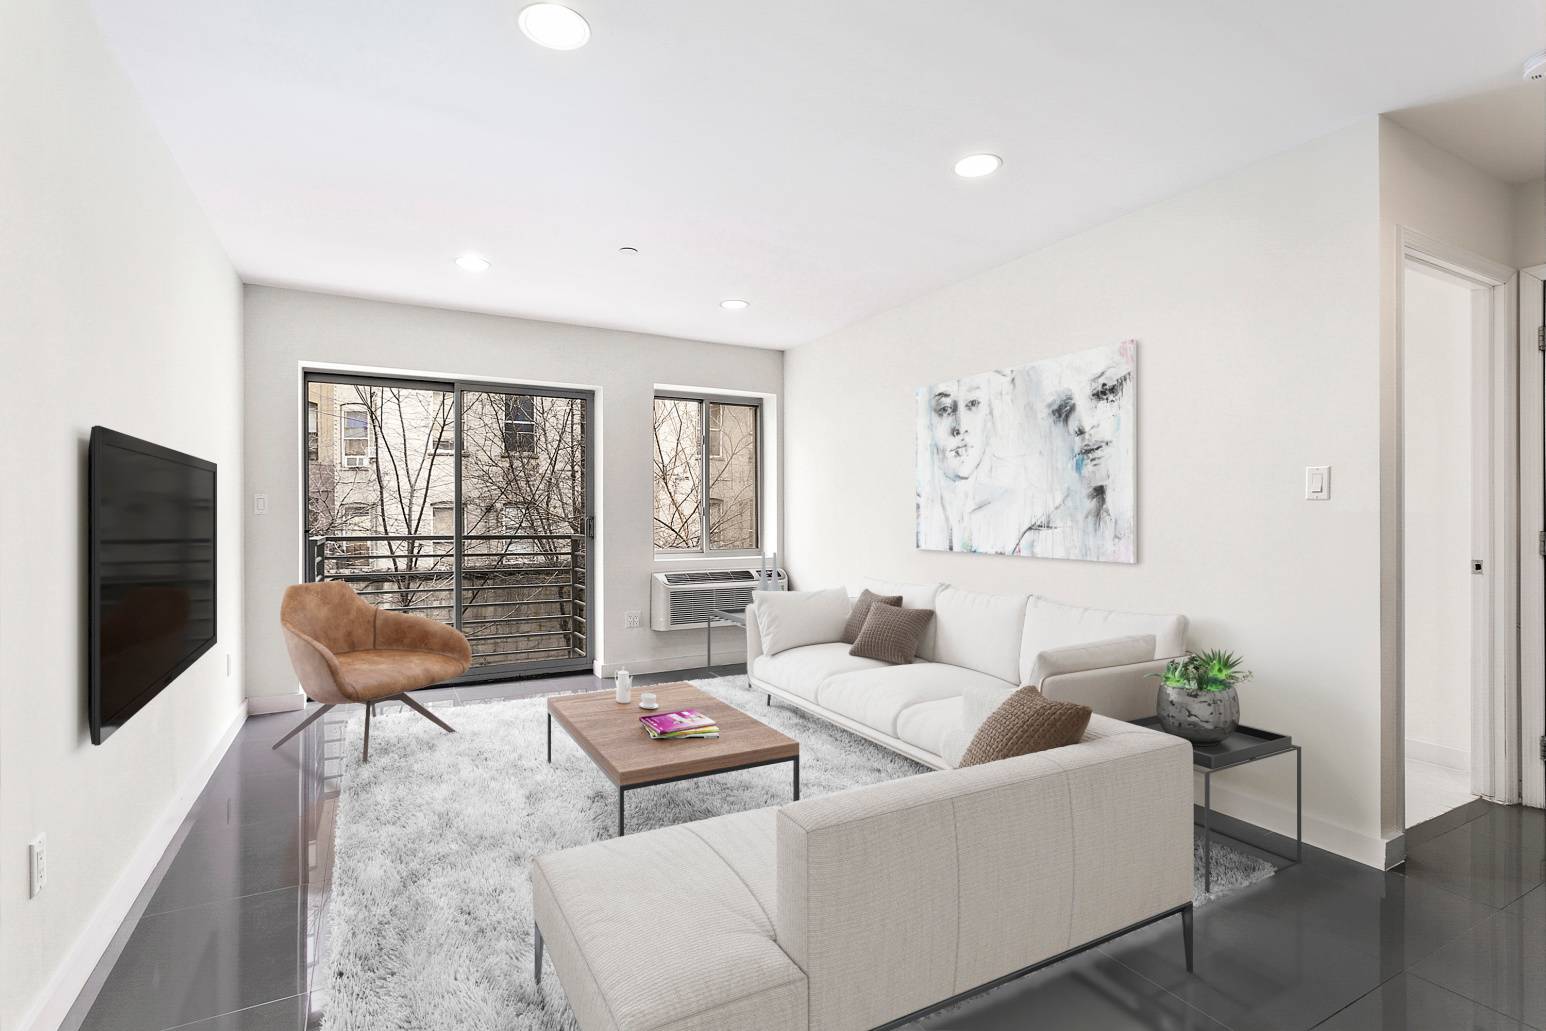 NEW NO FEE This sunny 1 bedroom apartment with a private balcony is conveniently located one block removed the from the 125th Street express local A, B, C, D train ...